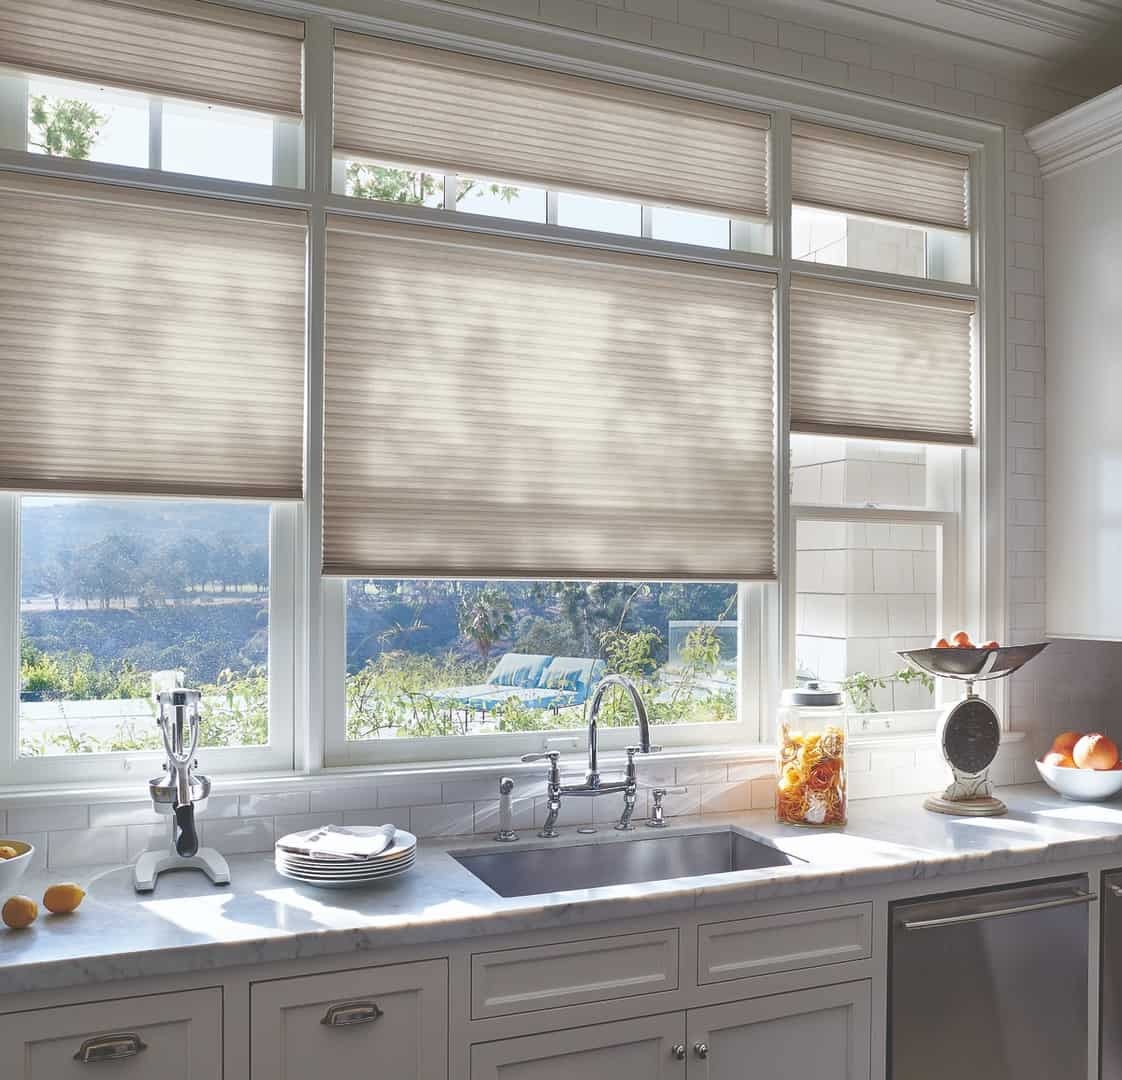 Duette® Honeycomb Shades near Raleigh, North Carolina (NC) Discover the benefits of Hunter Douglas shades